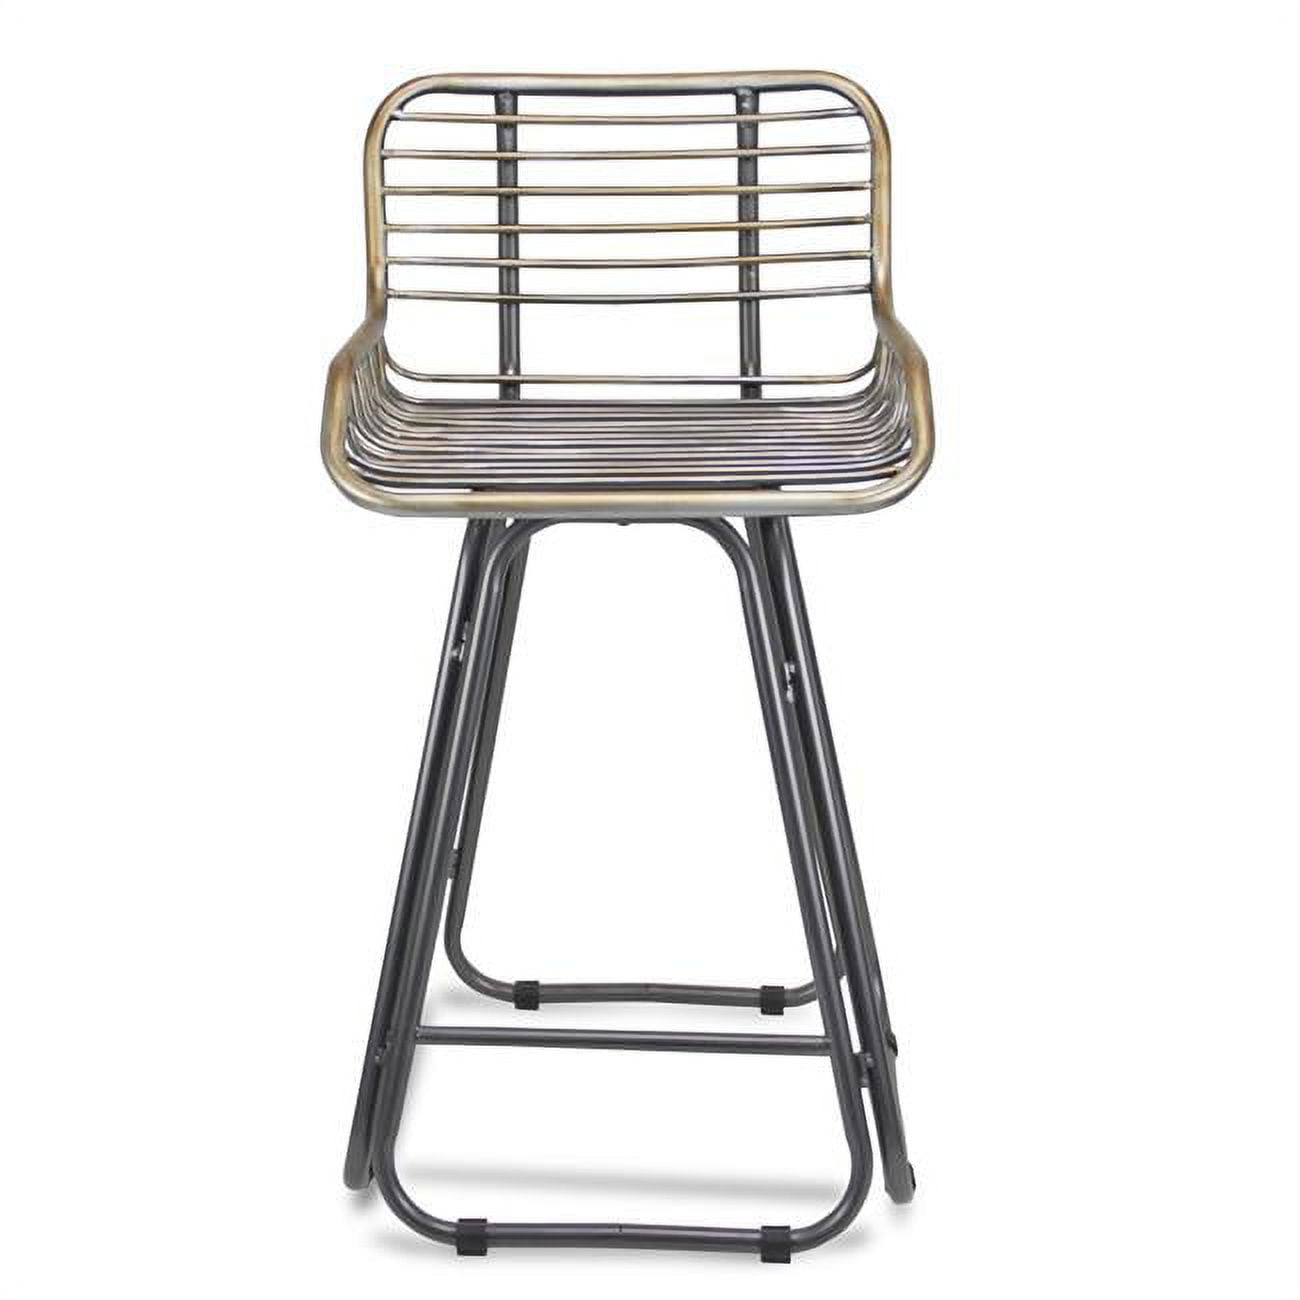 5441 Metal Chair With Back & Arm Rests